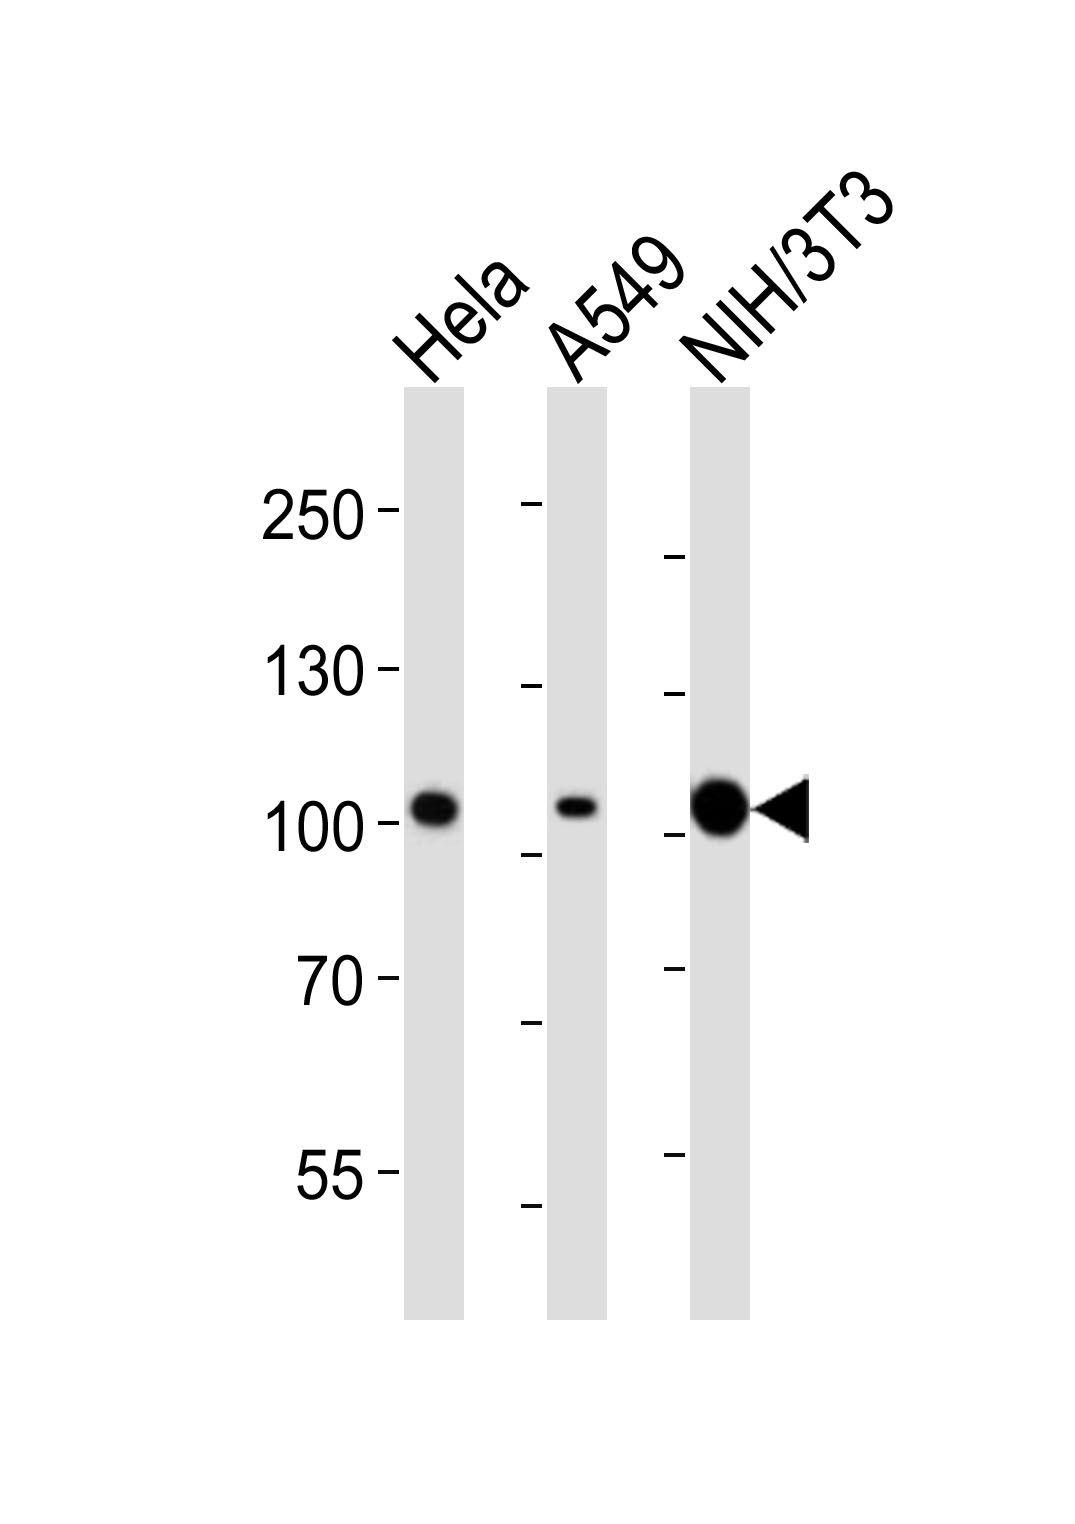 Western blot analysis of lysates from Hela, A549, mouse NIH/3T3 cell line (from left to right), using FER Antibody(Cat.  #AM8452b). AM8452b was diluted at 1:2000 at each lane.  A goat anti-mouse IgG H&L(HRP) at 1:3000 dilution was used as the secondary antibody. Lysates at 20?g per lane.